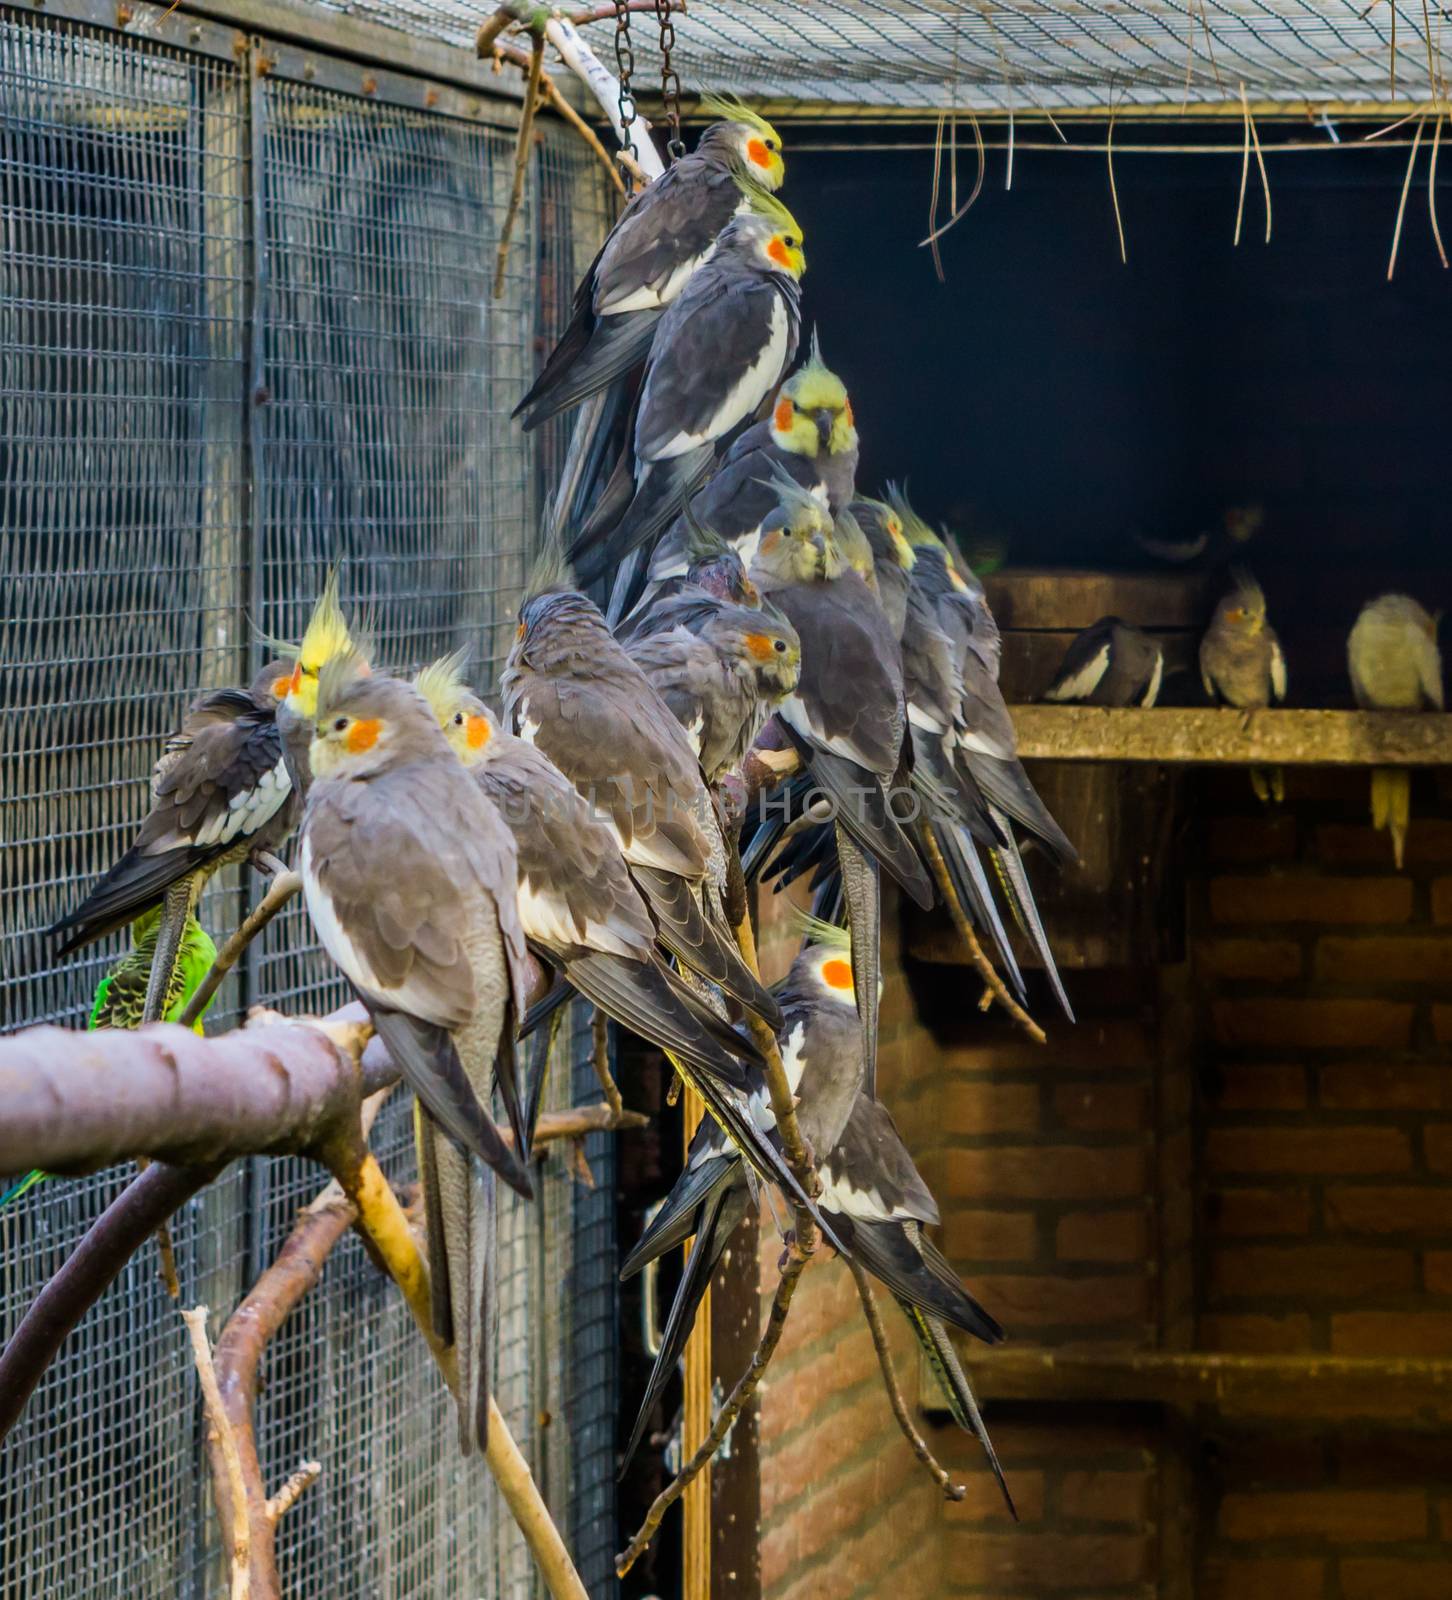 Aviculture, a aviary full of cockatiels, tropical crested birds from Australia, Popular pets